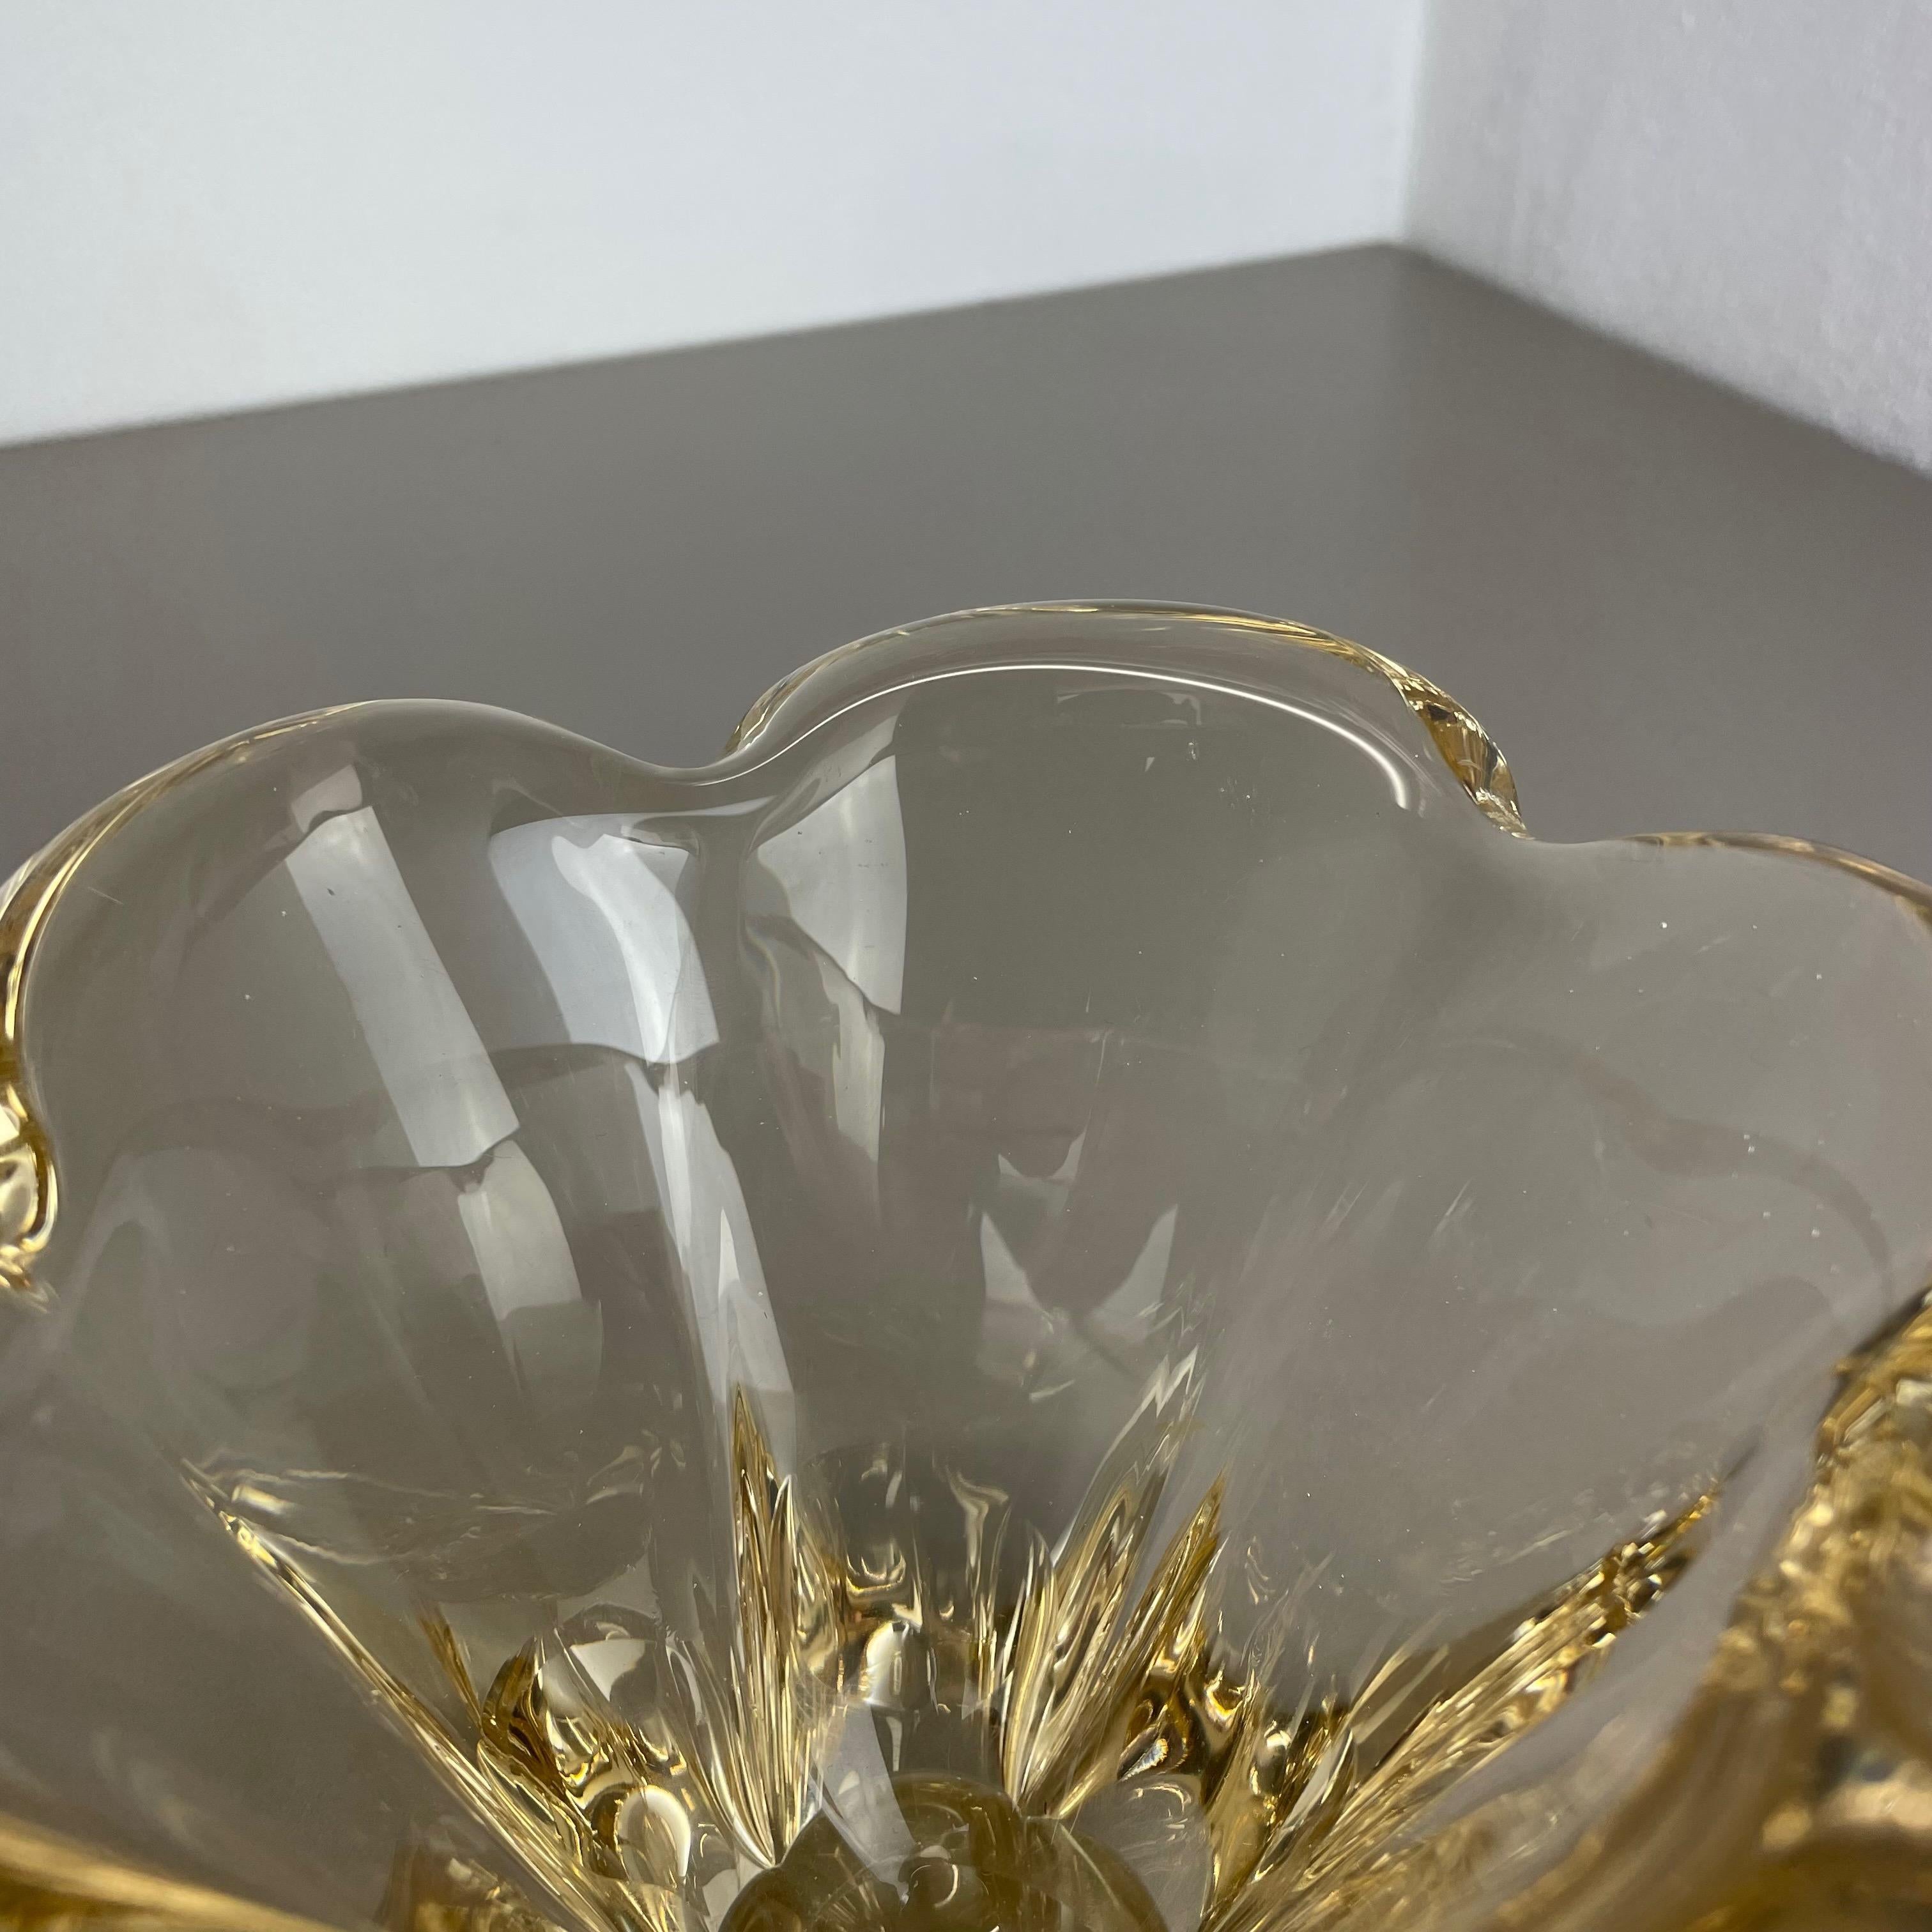 Large 3kg Crystal Glass Centerpiece Shell Bowl by DAUM Nancy, France, 1970s For Sale 4